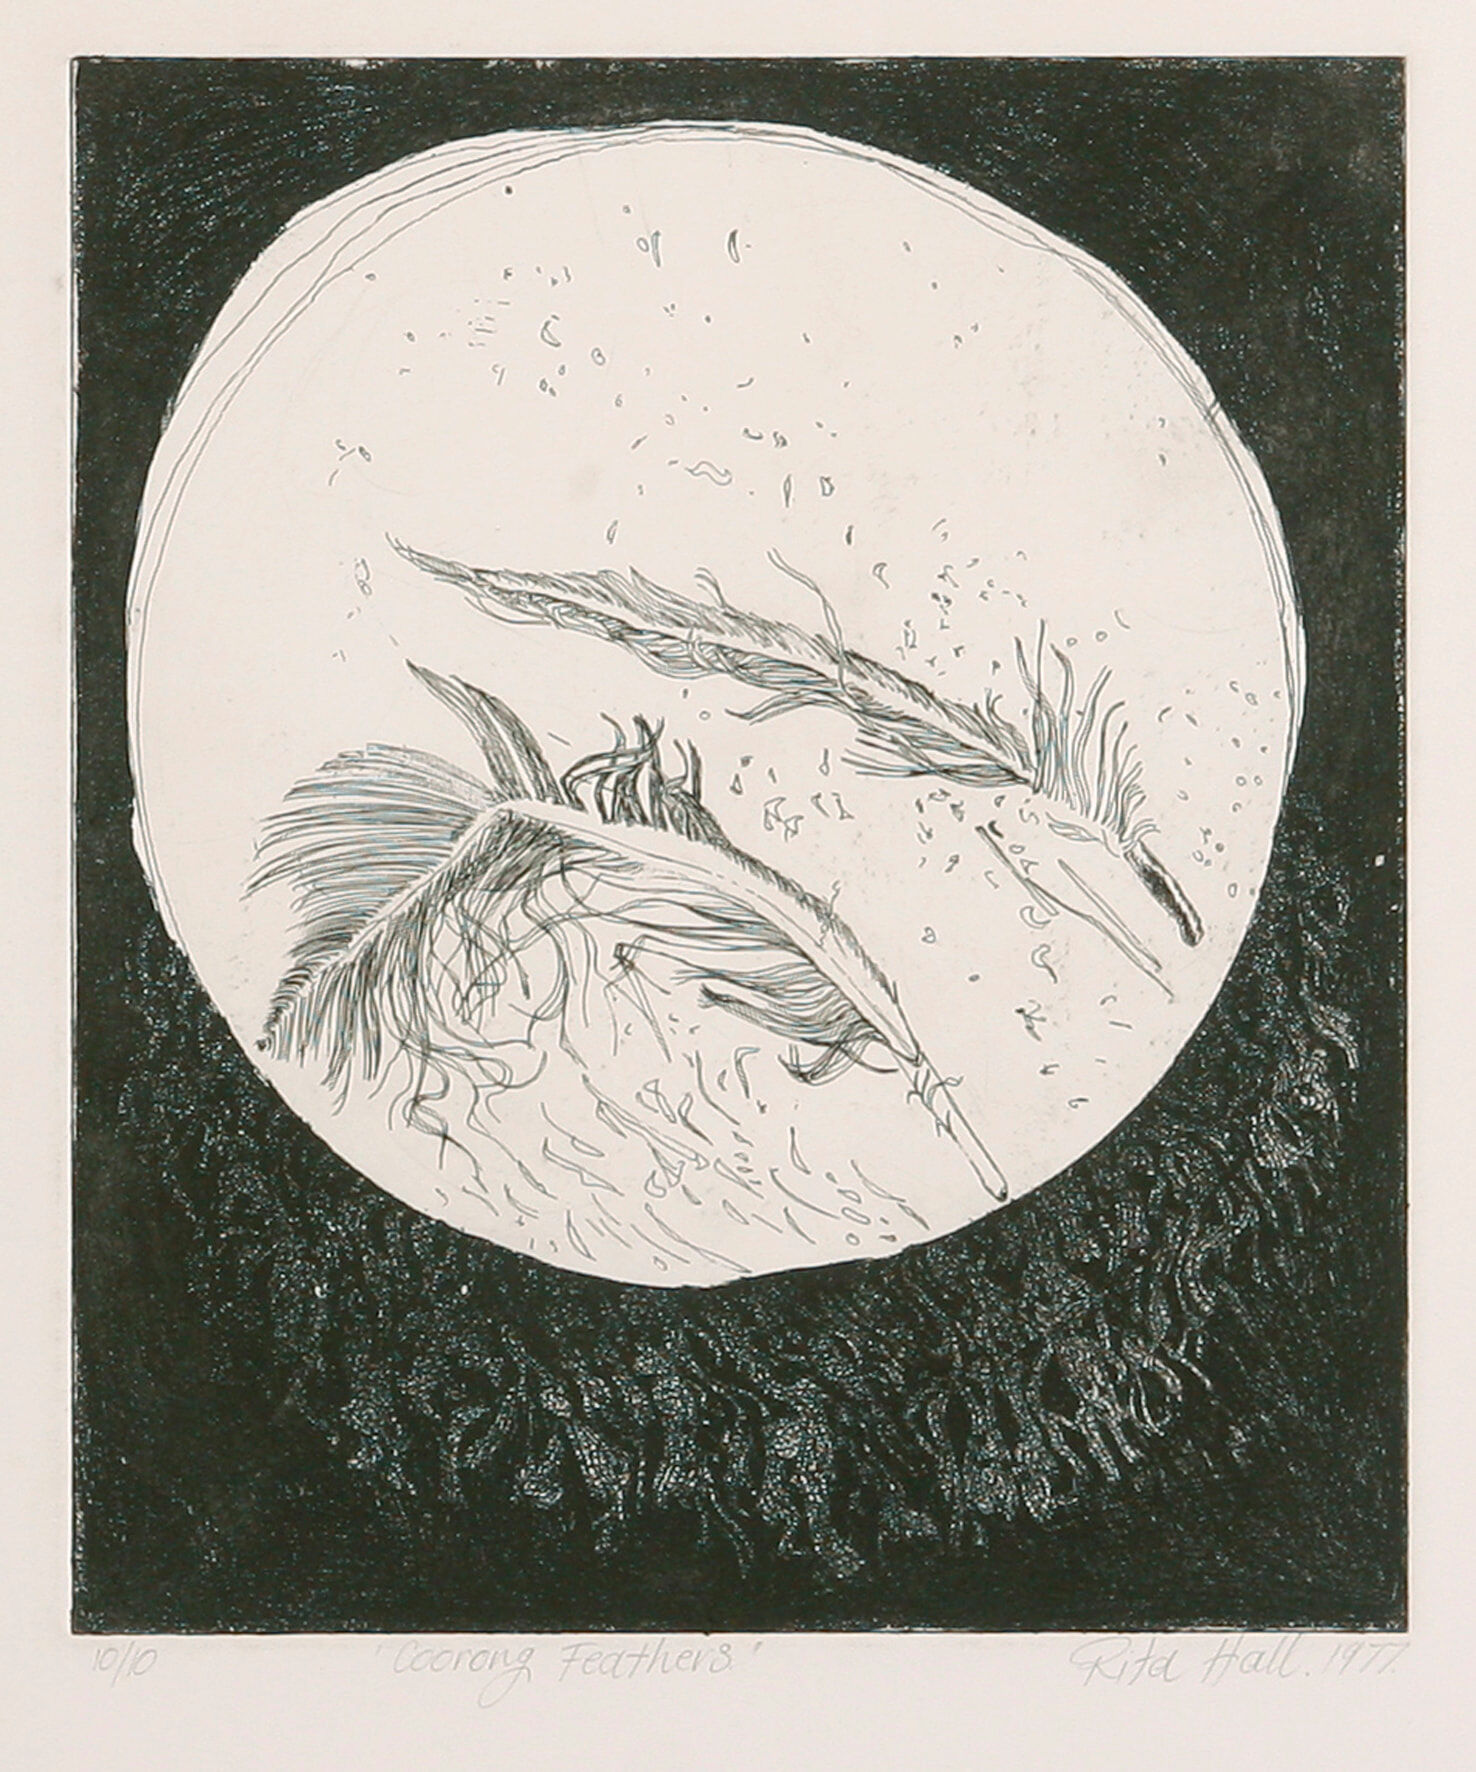 Coorong Feathers 1977 Etching Image 30 x 25cm